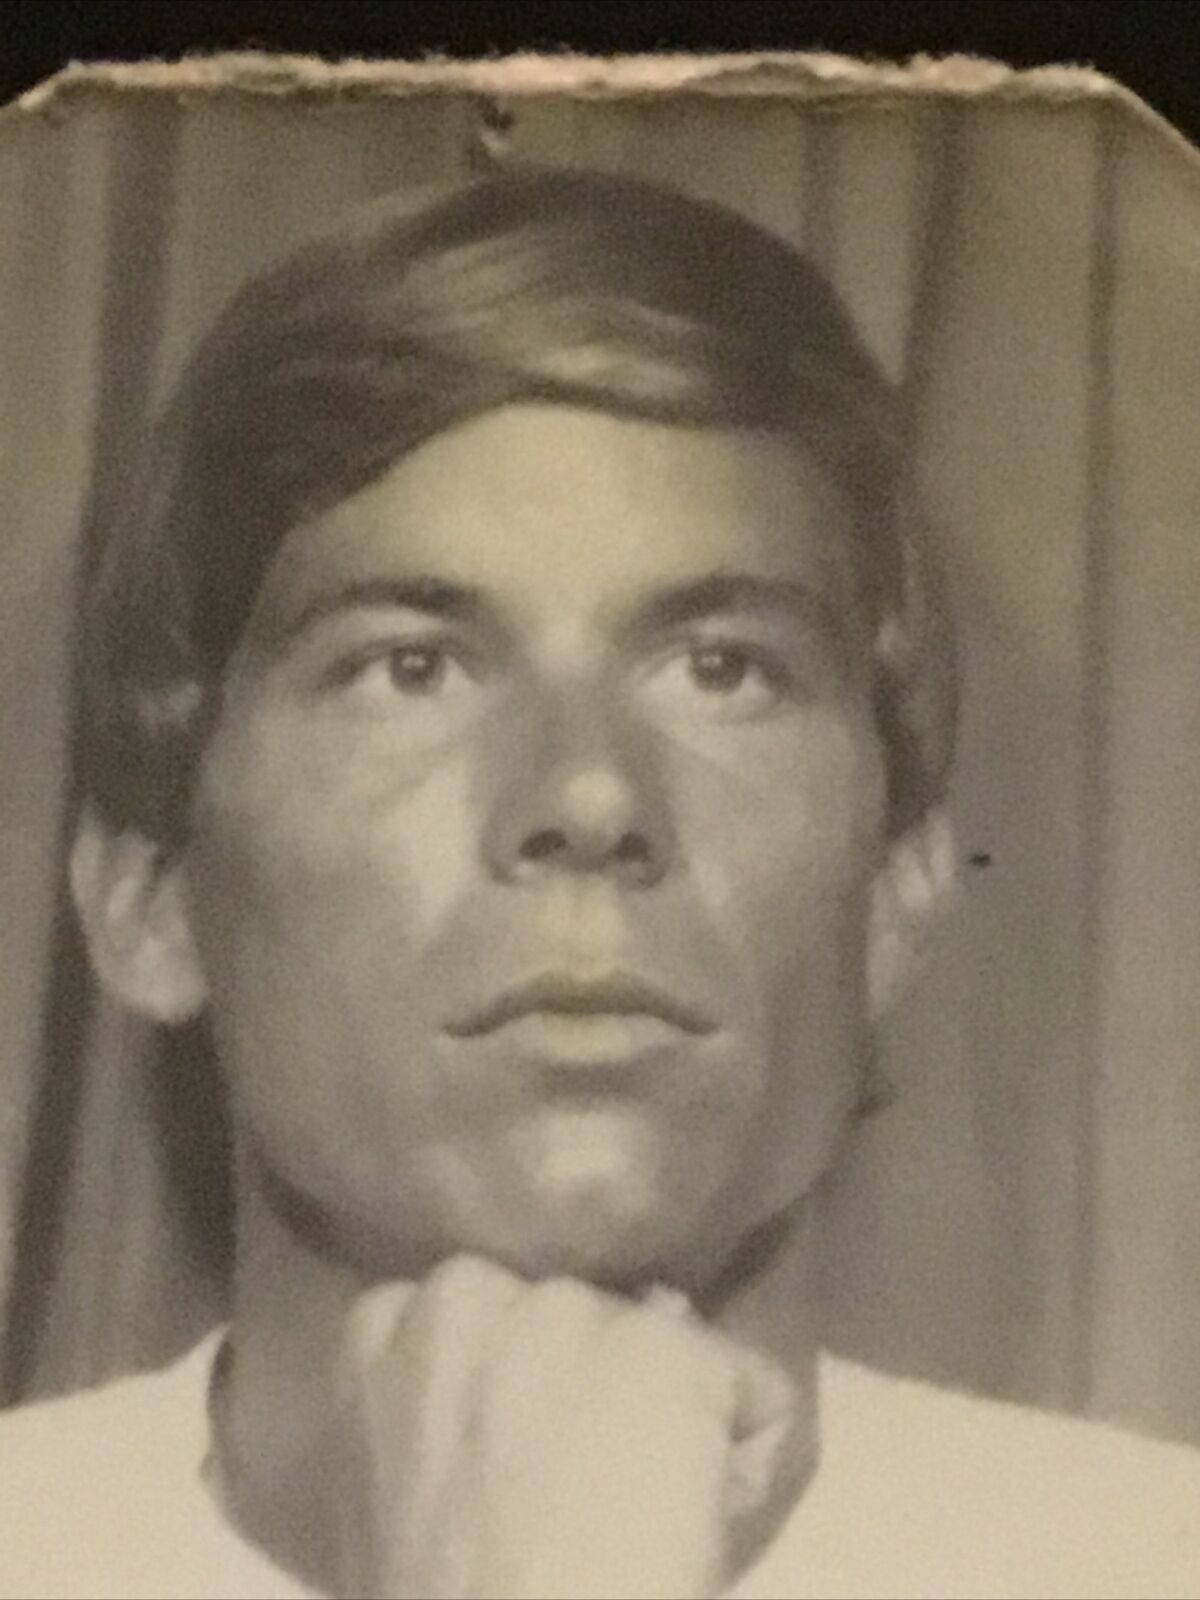 unique vintage photobooth photo of young contemplative Andy Warhol